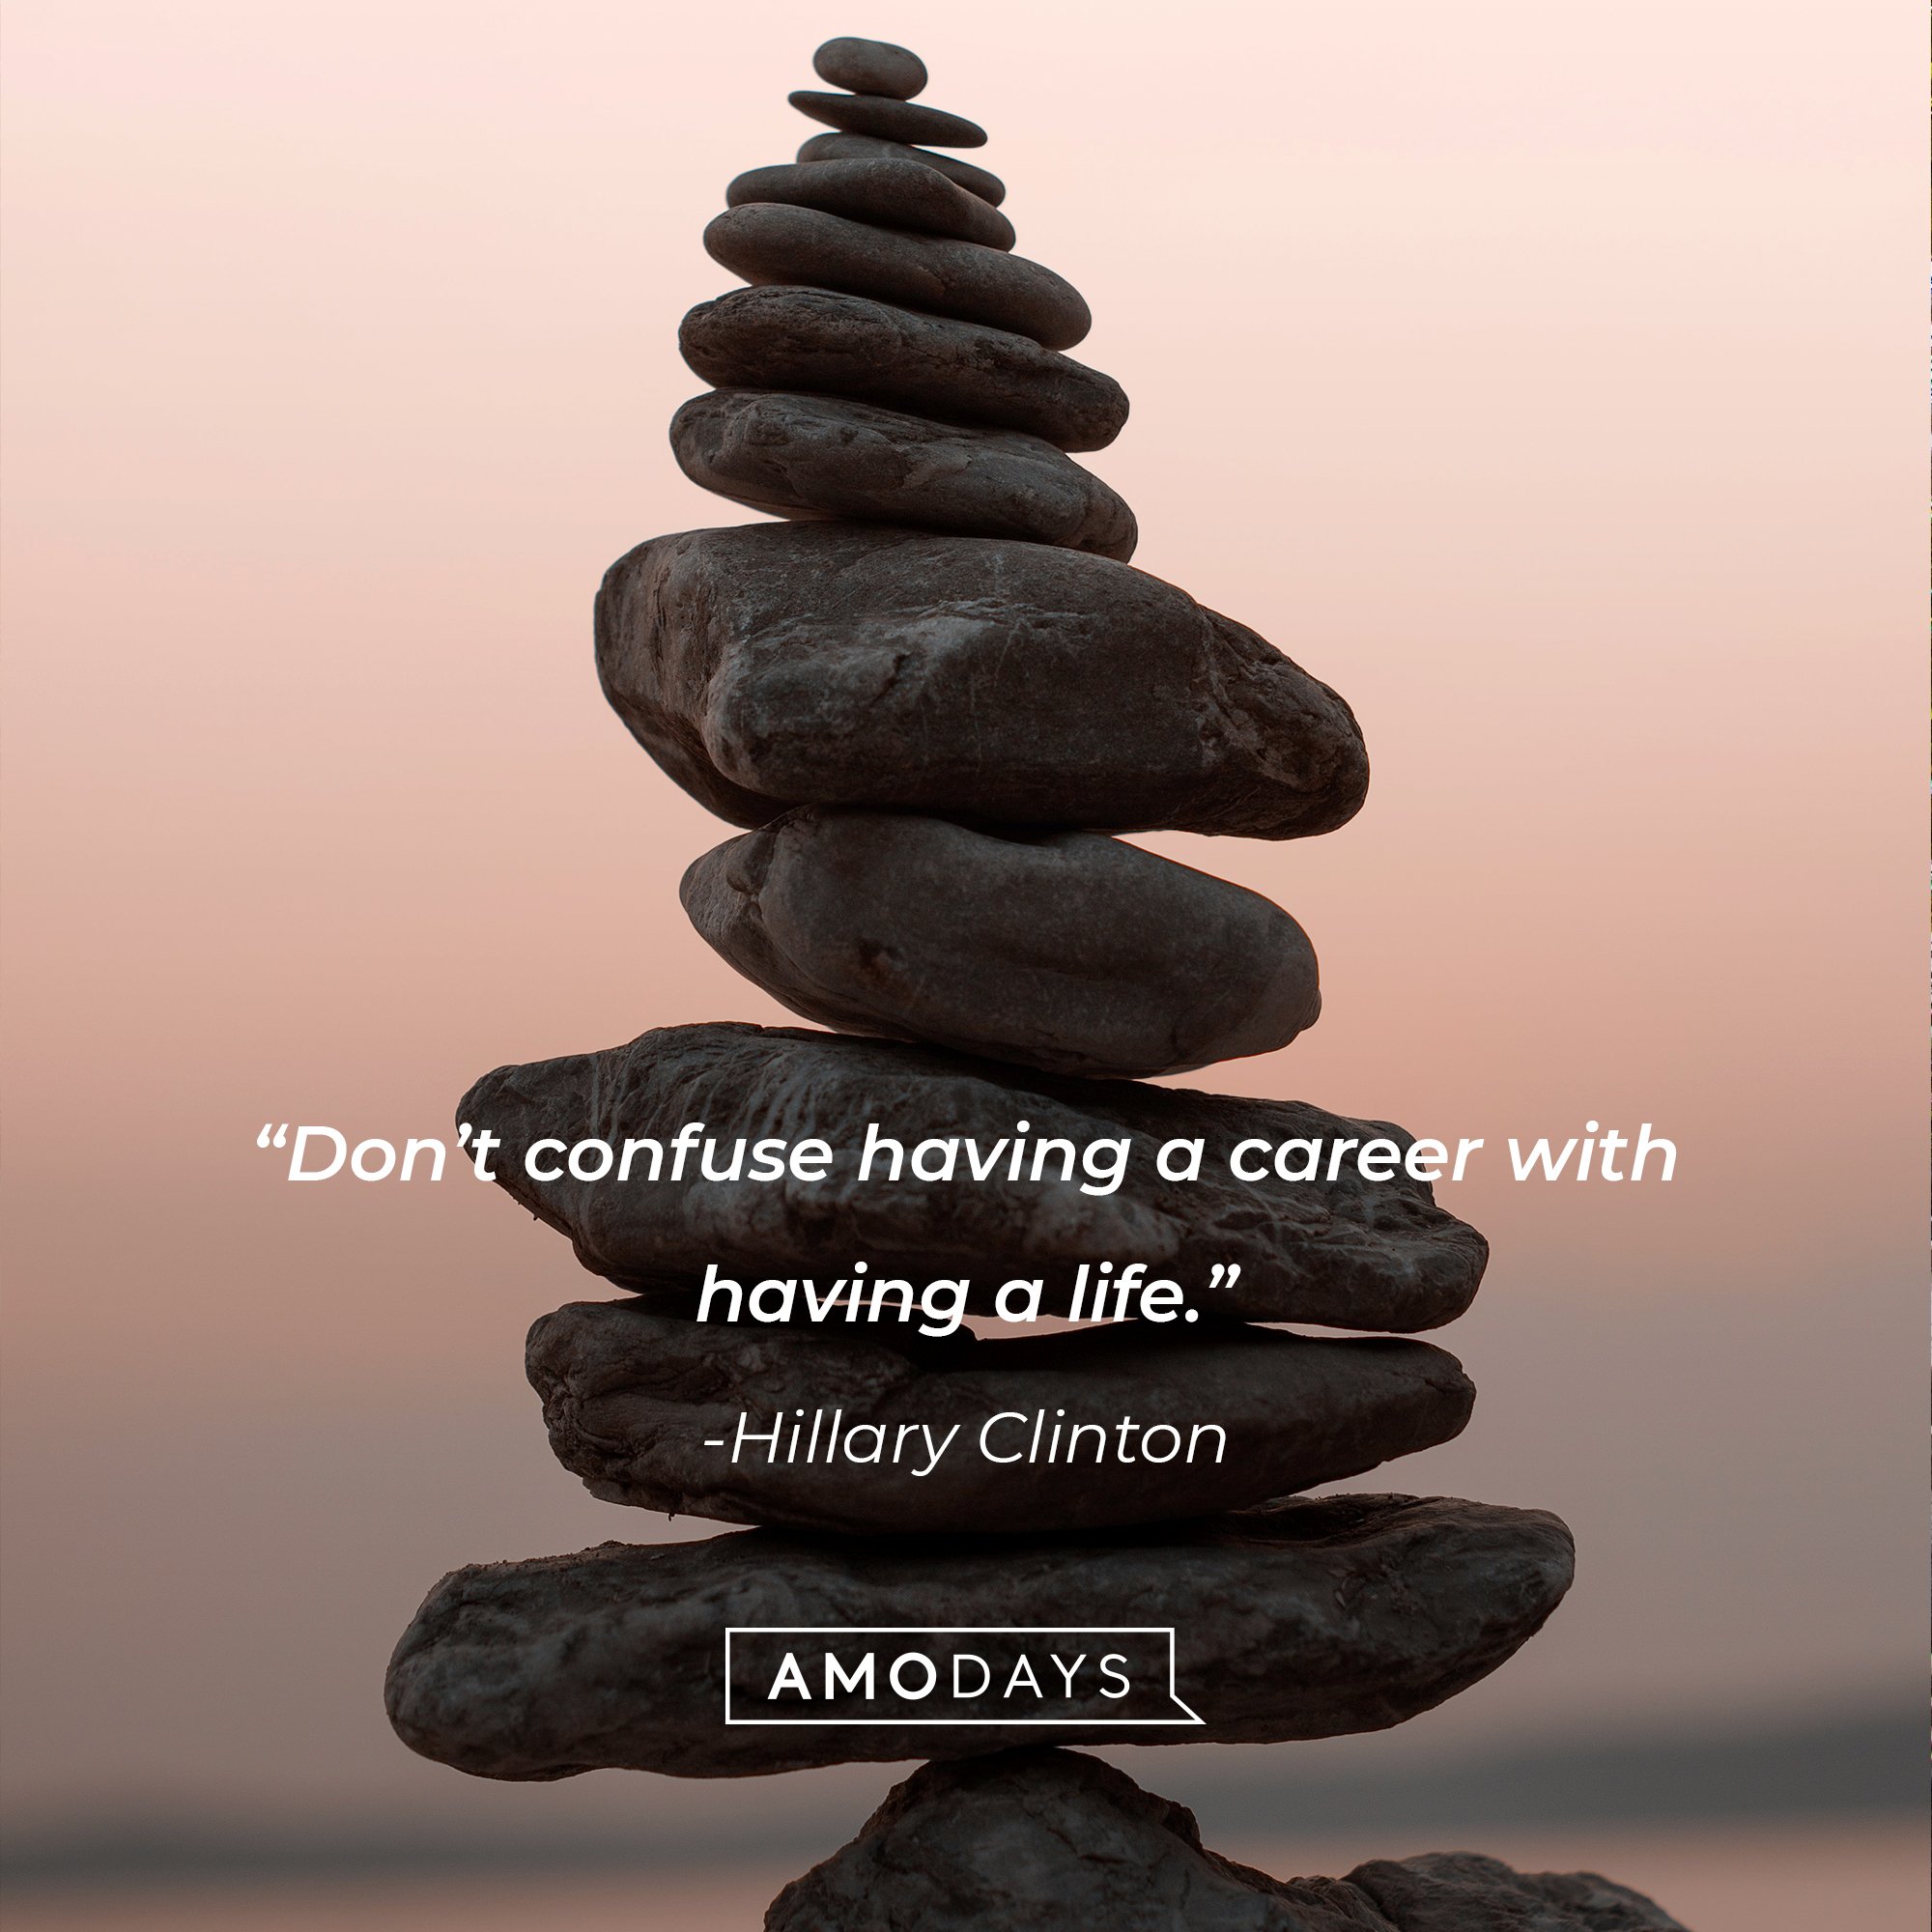 Hillary Clinton's quote: “Don’t confuse having a career with having a life.” | Image: AmoDays